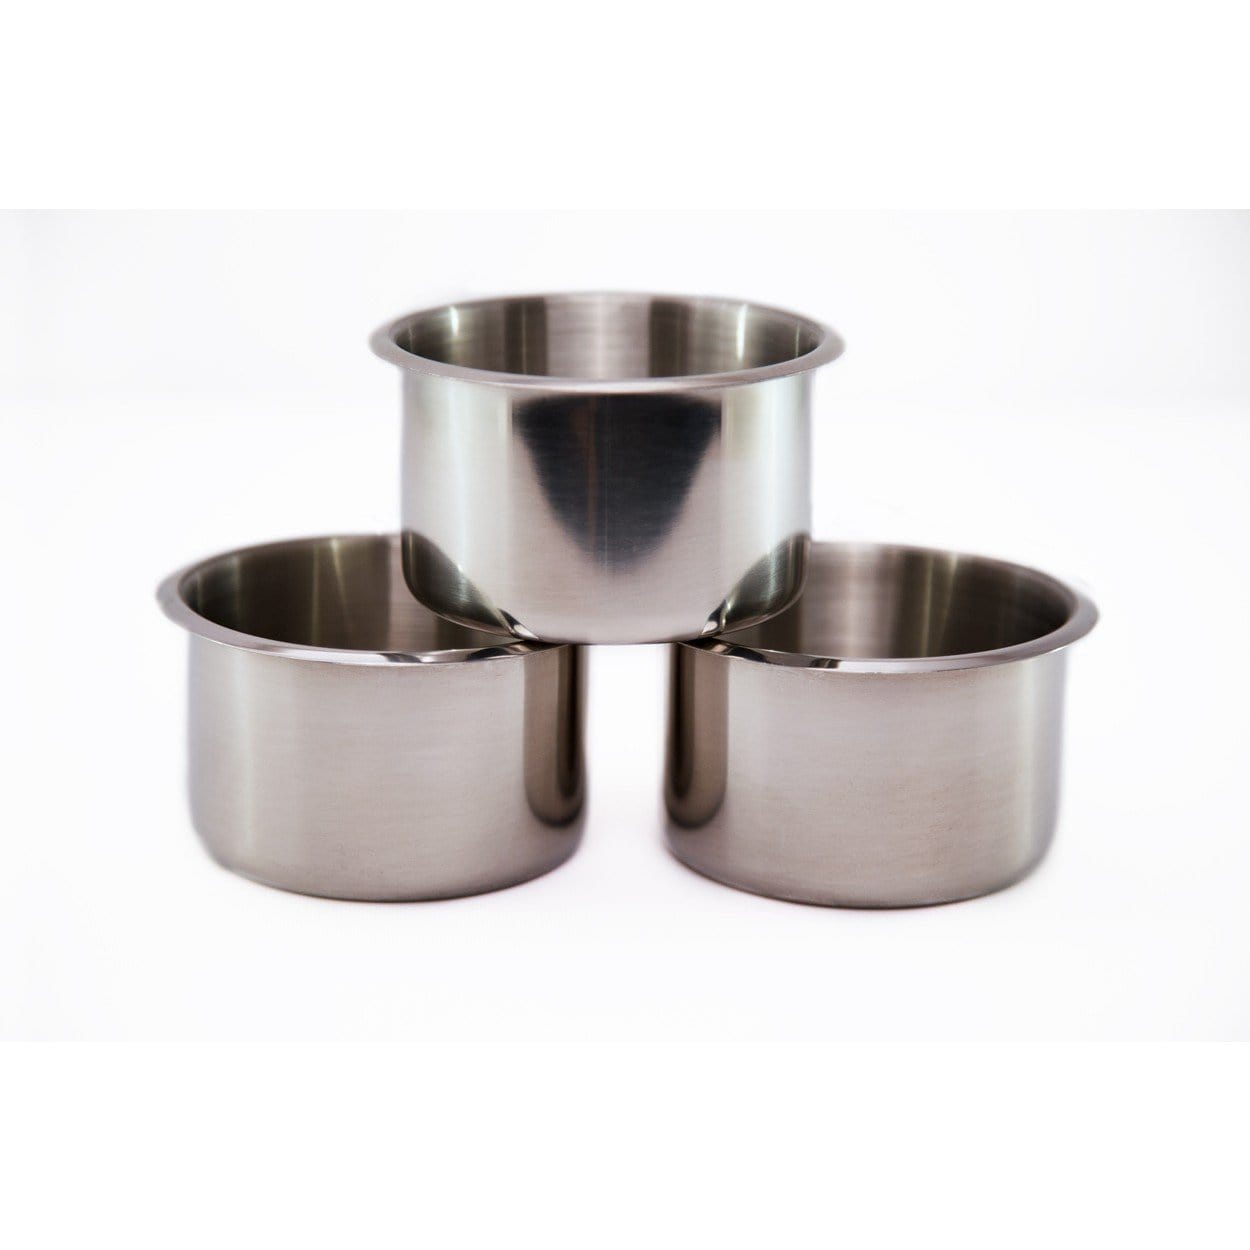 BBO Poker Tables BBO Poker Tables 4 Inch Large Cup Holders for Poker Table Poker & Game Tables Stainless Steel BBO-CUPH-SS